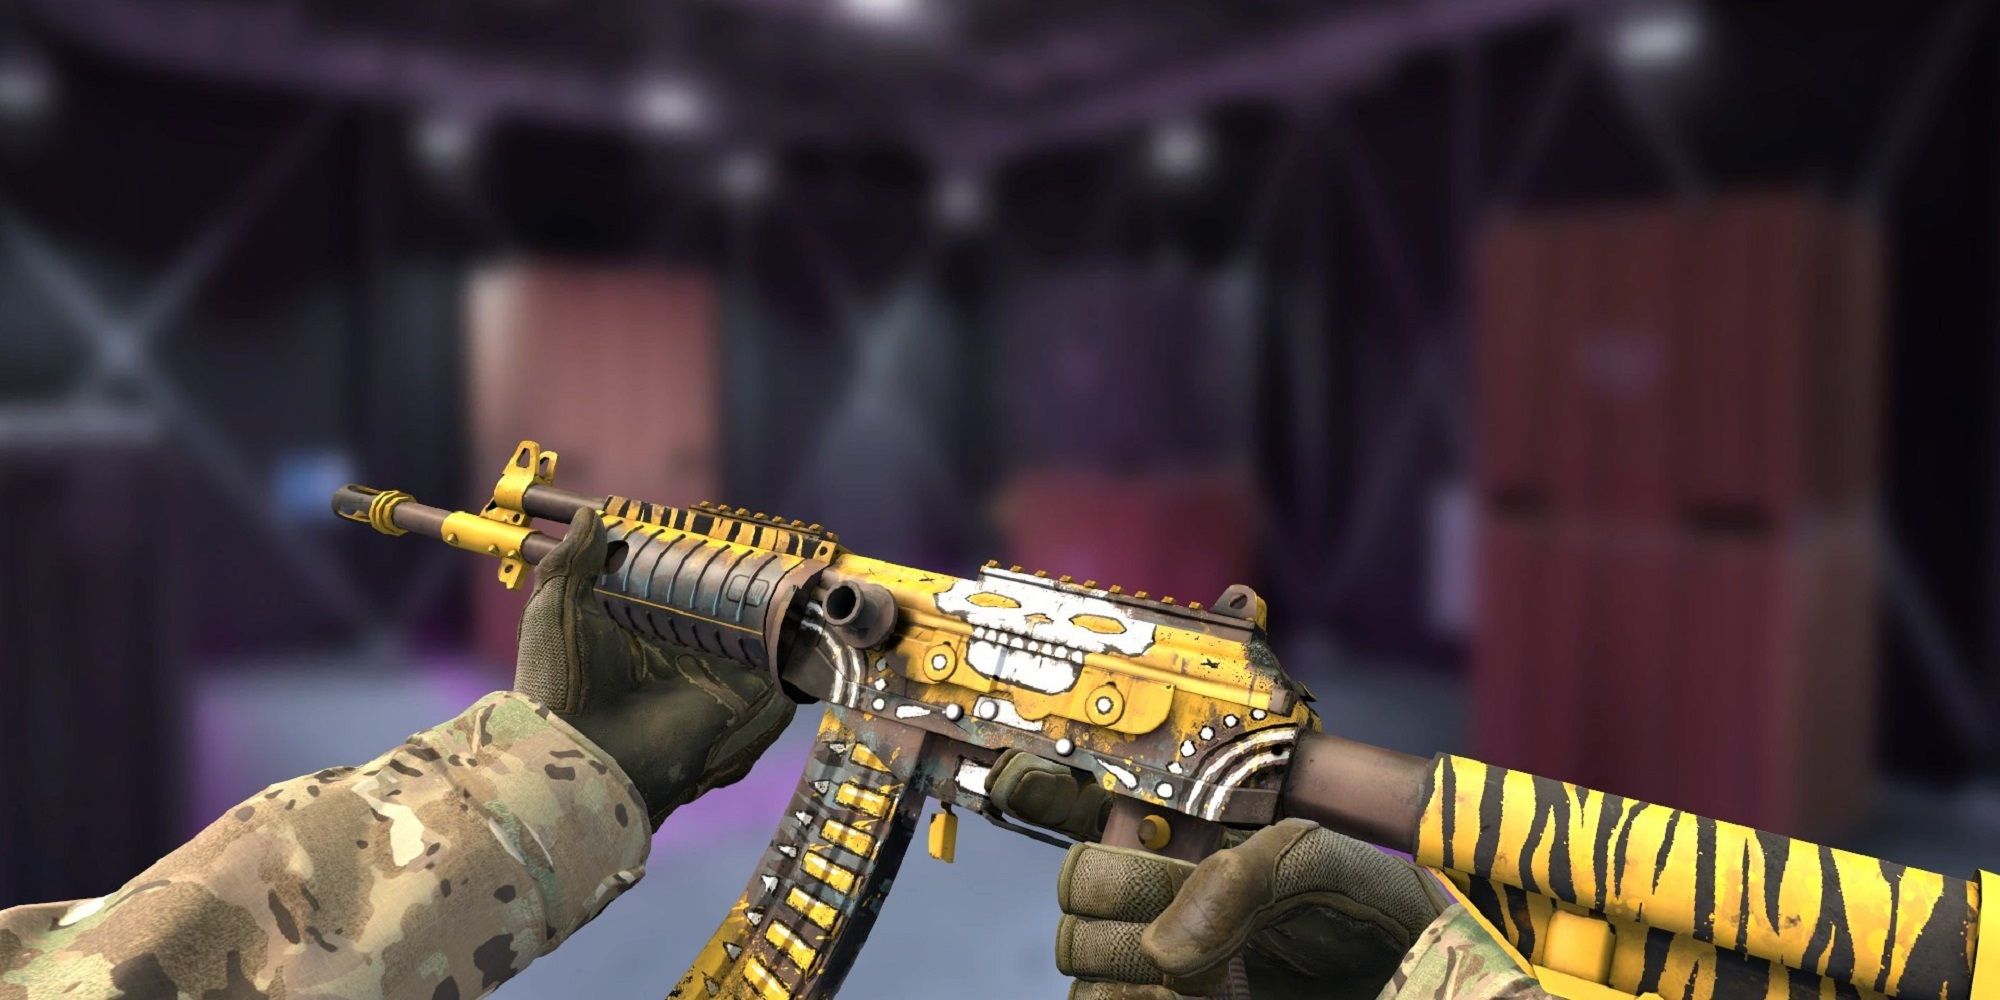 An image of Galil AR Chatterbox CSGO